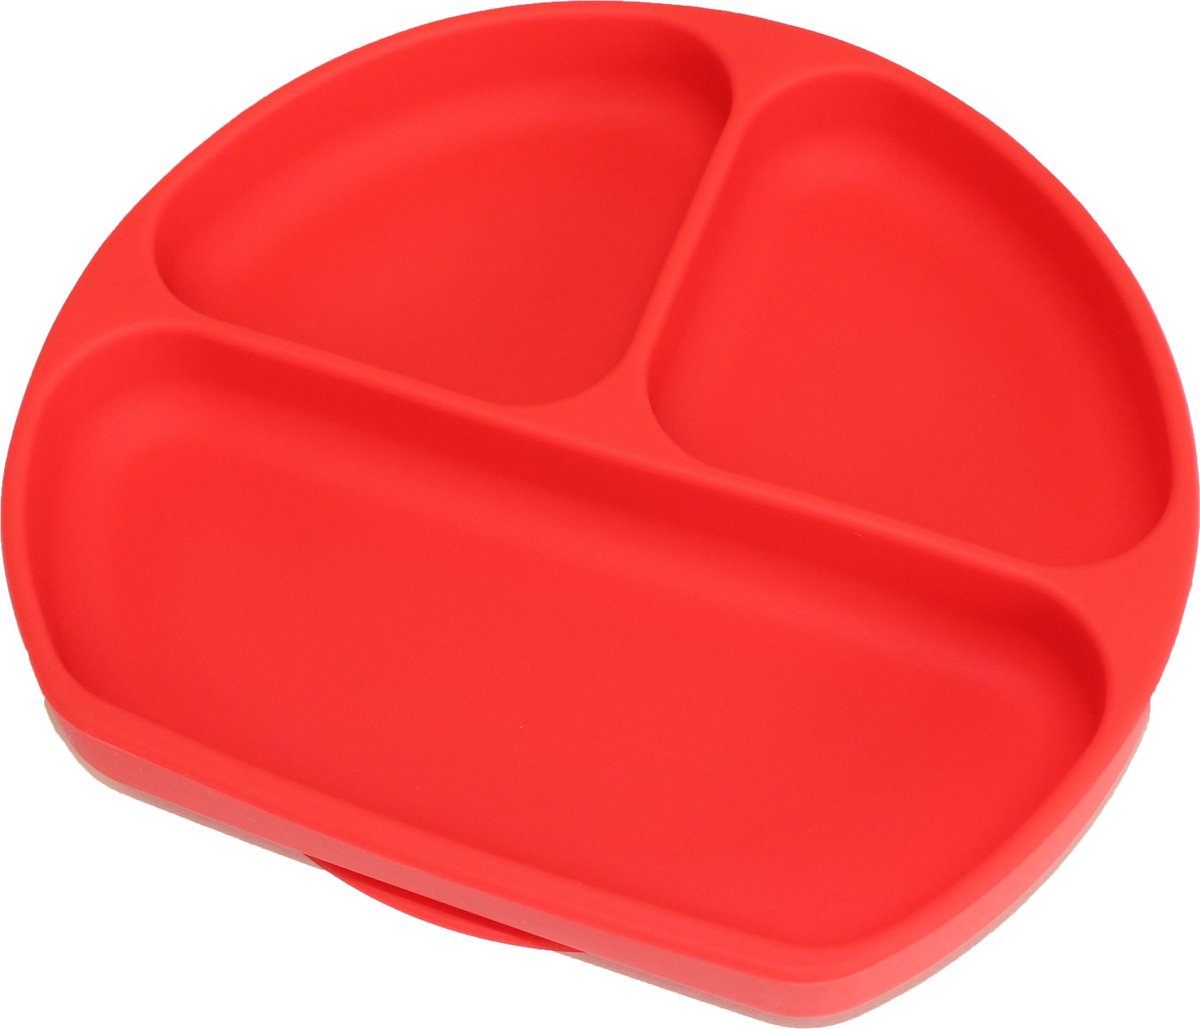 Anti-slip silicone 3D kinder placemat Plate Rood | Kinderplacemat | Vaatwasser bestendig | Anti Slip | Super leuk | By TOOBS